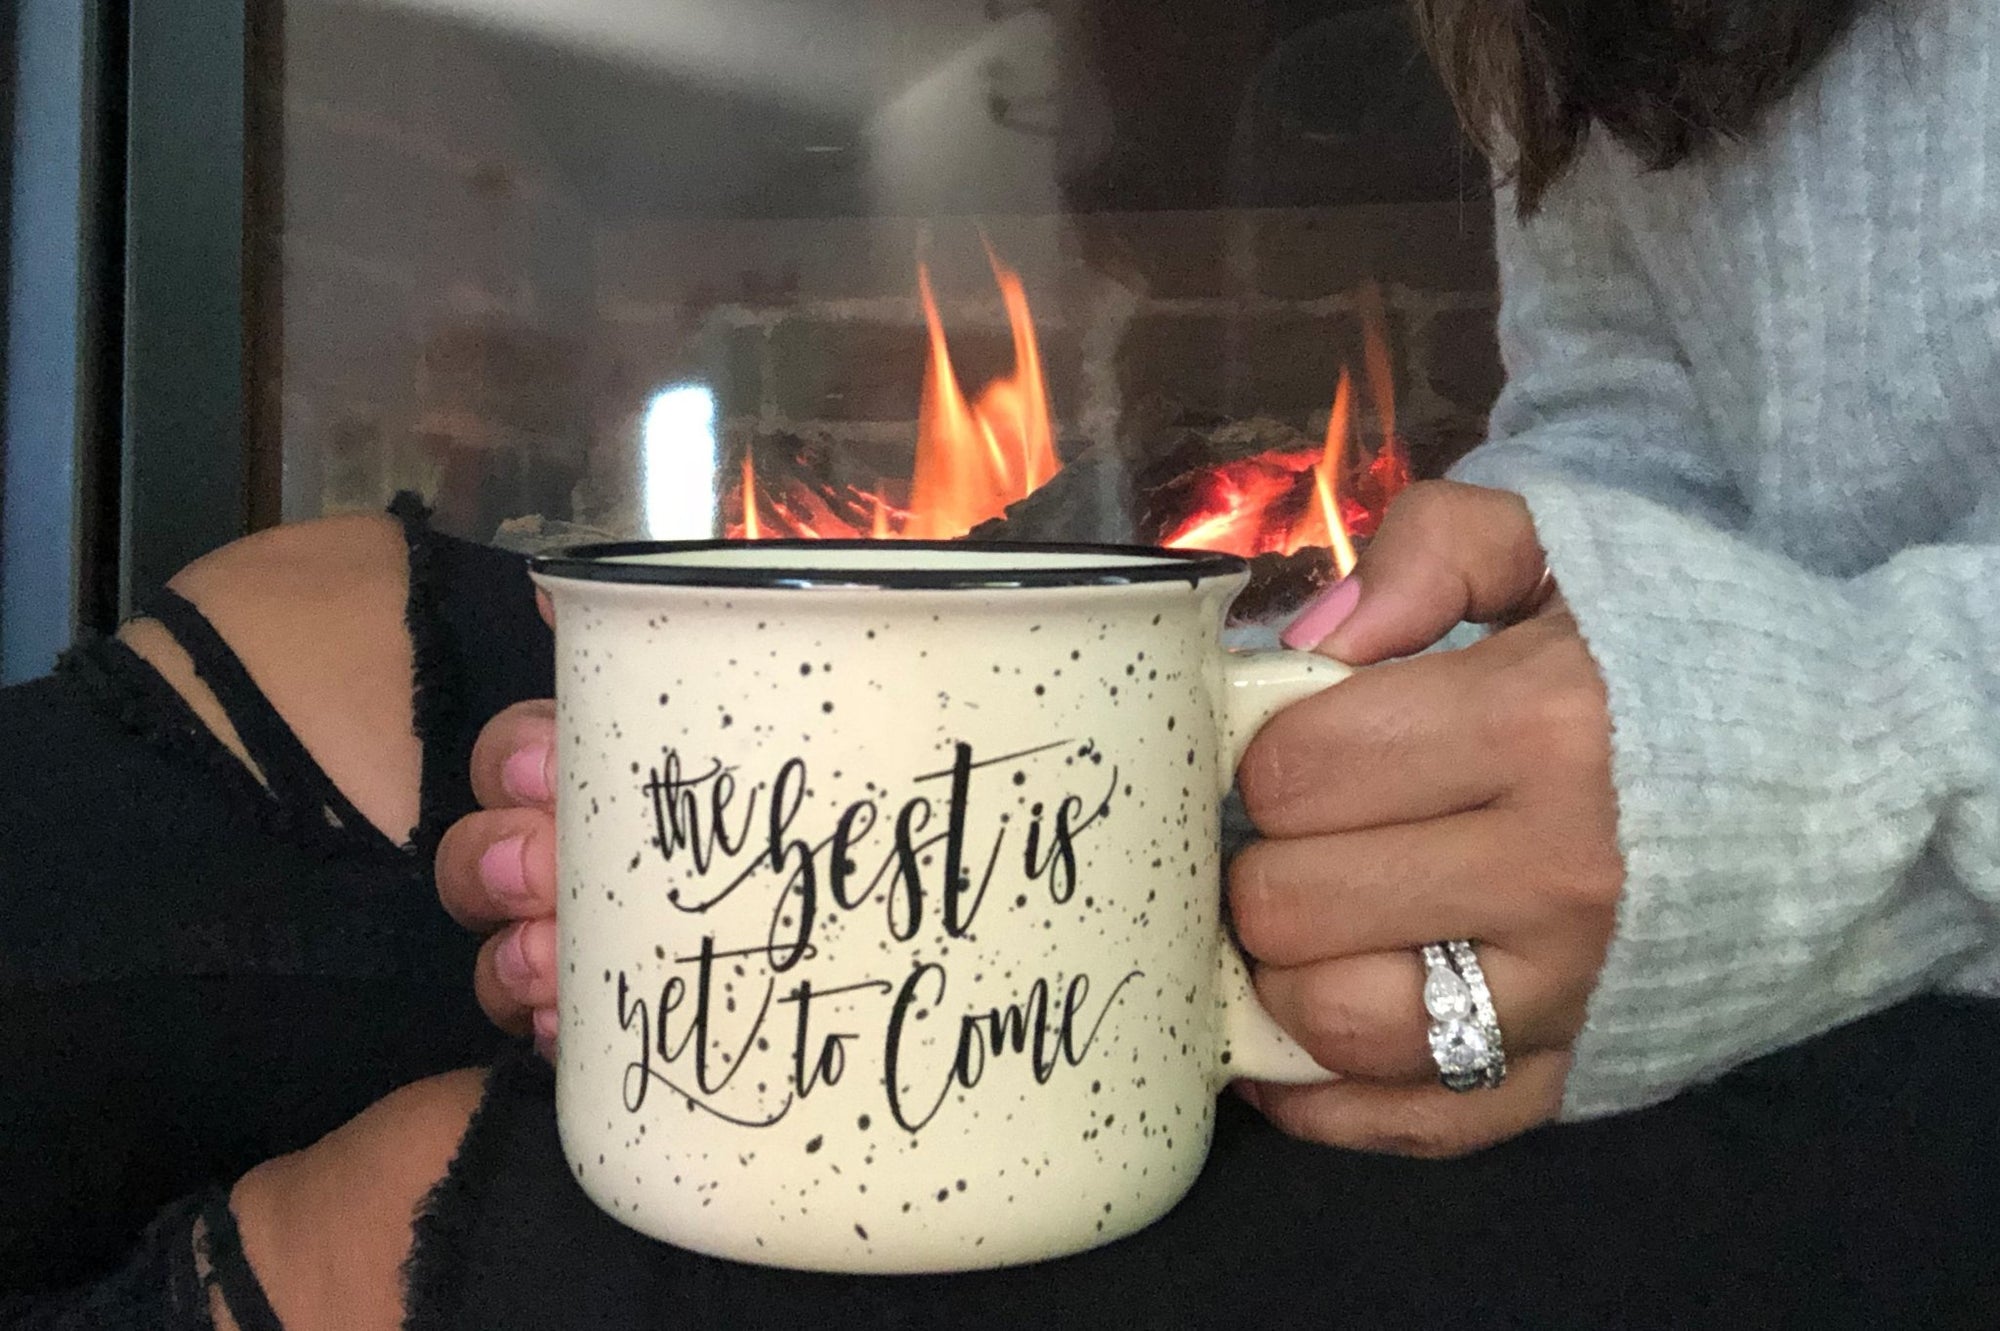 https://cdn.shopify.com/s/files/1/0826/1673/products/The_Best_is_Yet_to_Come_Mug_-_New_Year_Mug_-_New_Year_Inspiration_-_Pretty_Collected-372779_2000x.jpg?v=1579204646